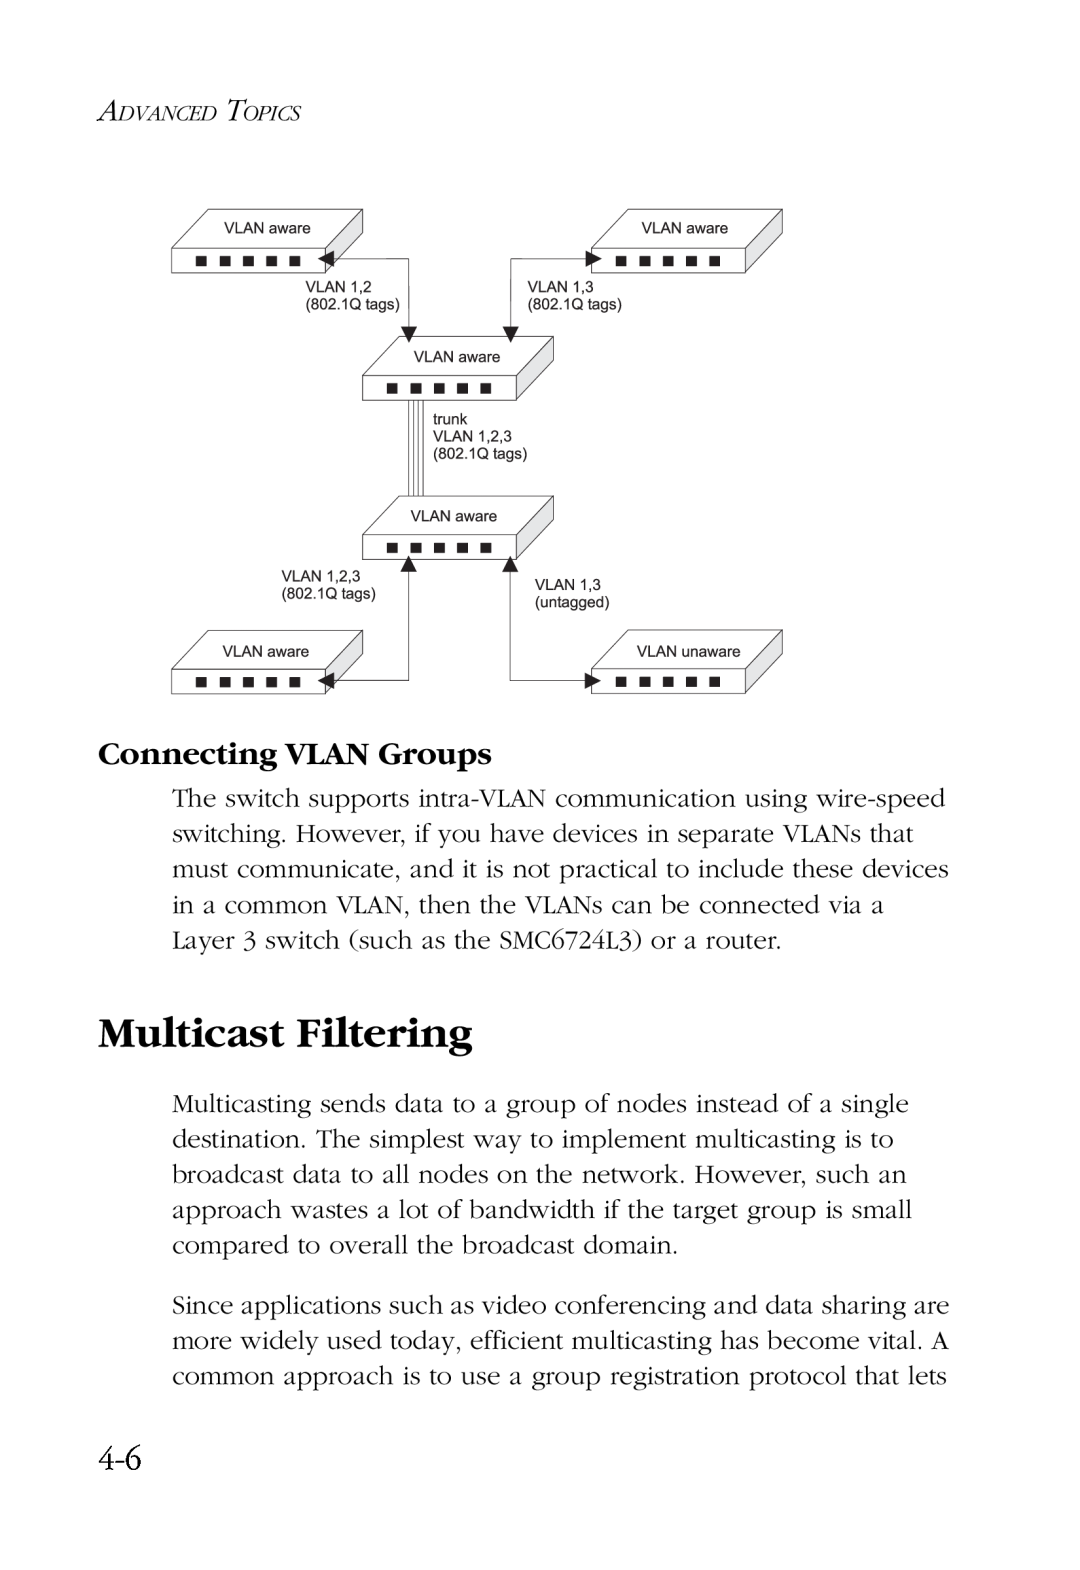 SMC Networks SMC6924VF manual Multicast Filtering, Connecting VLAN Groups 